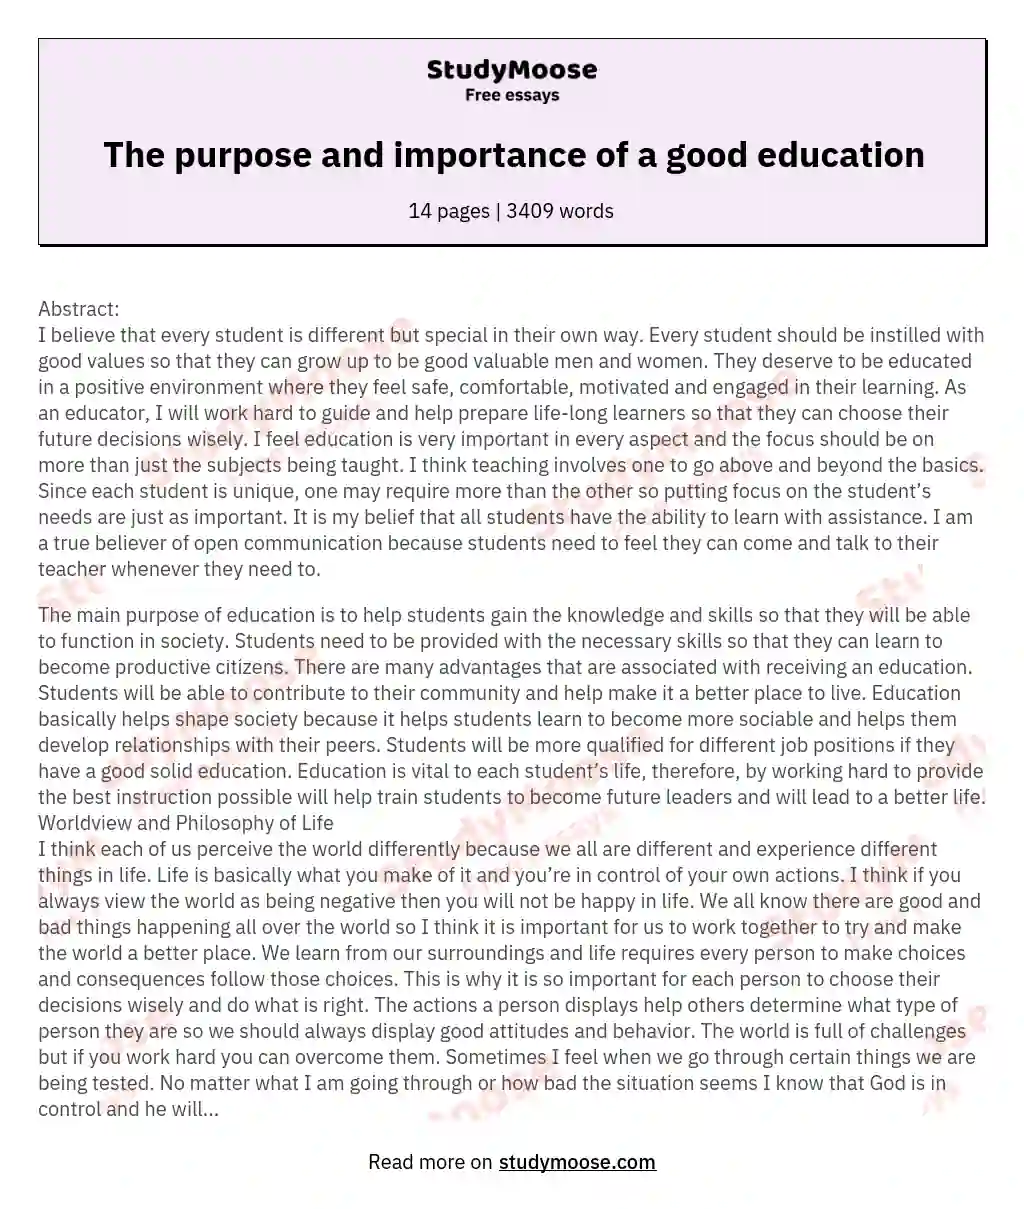 The purpose and importance of a good education essay